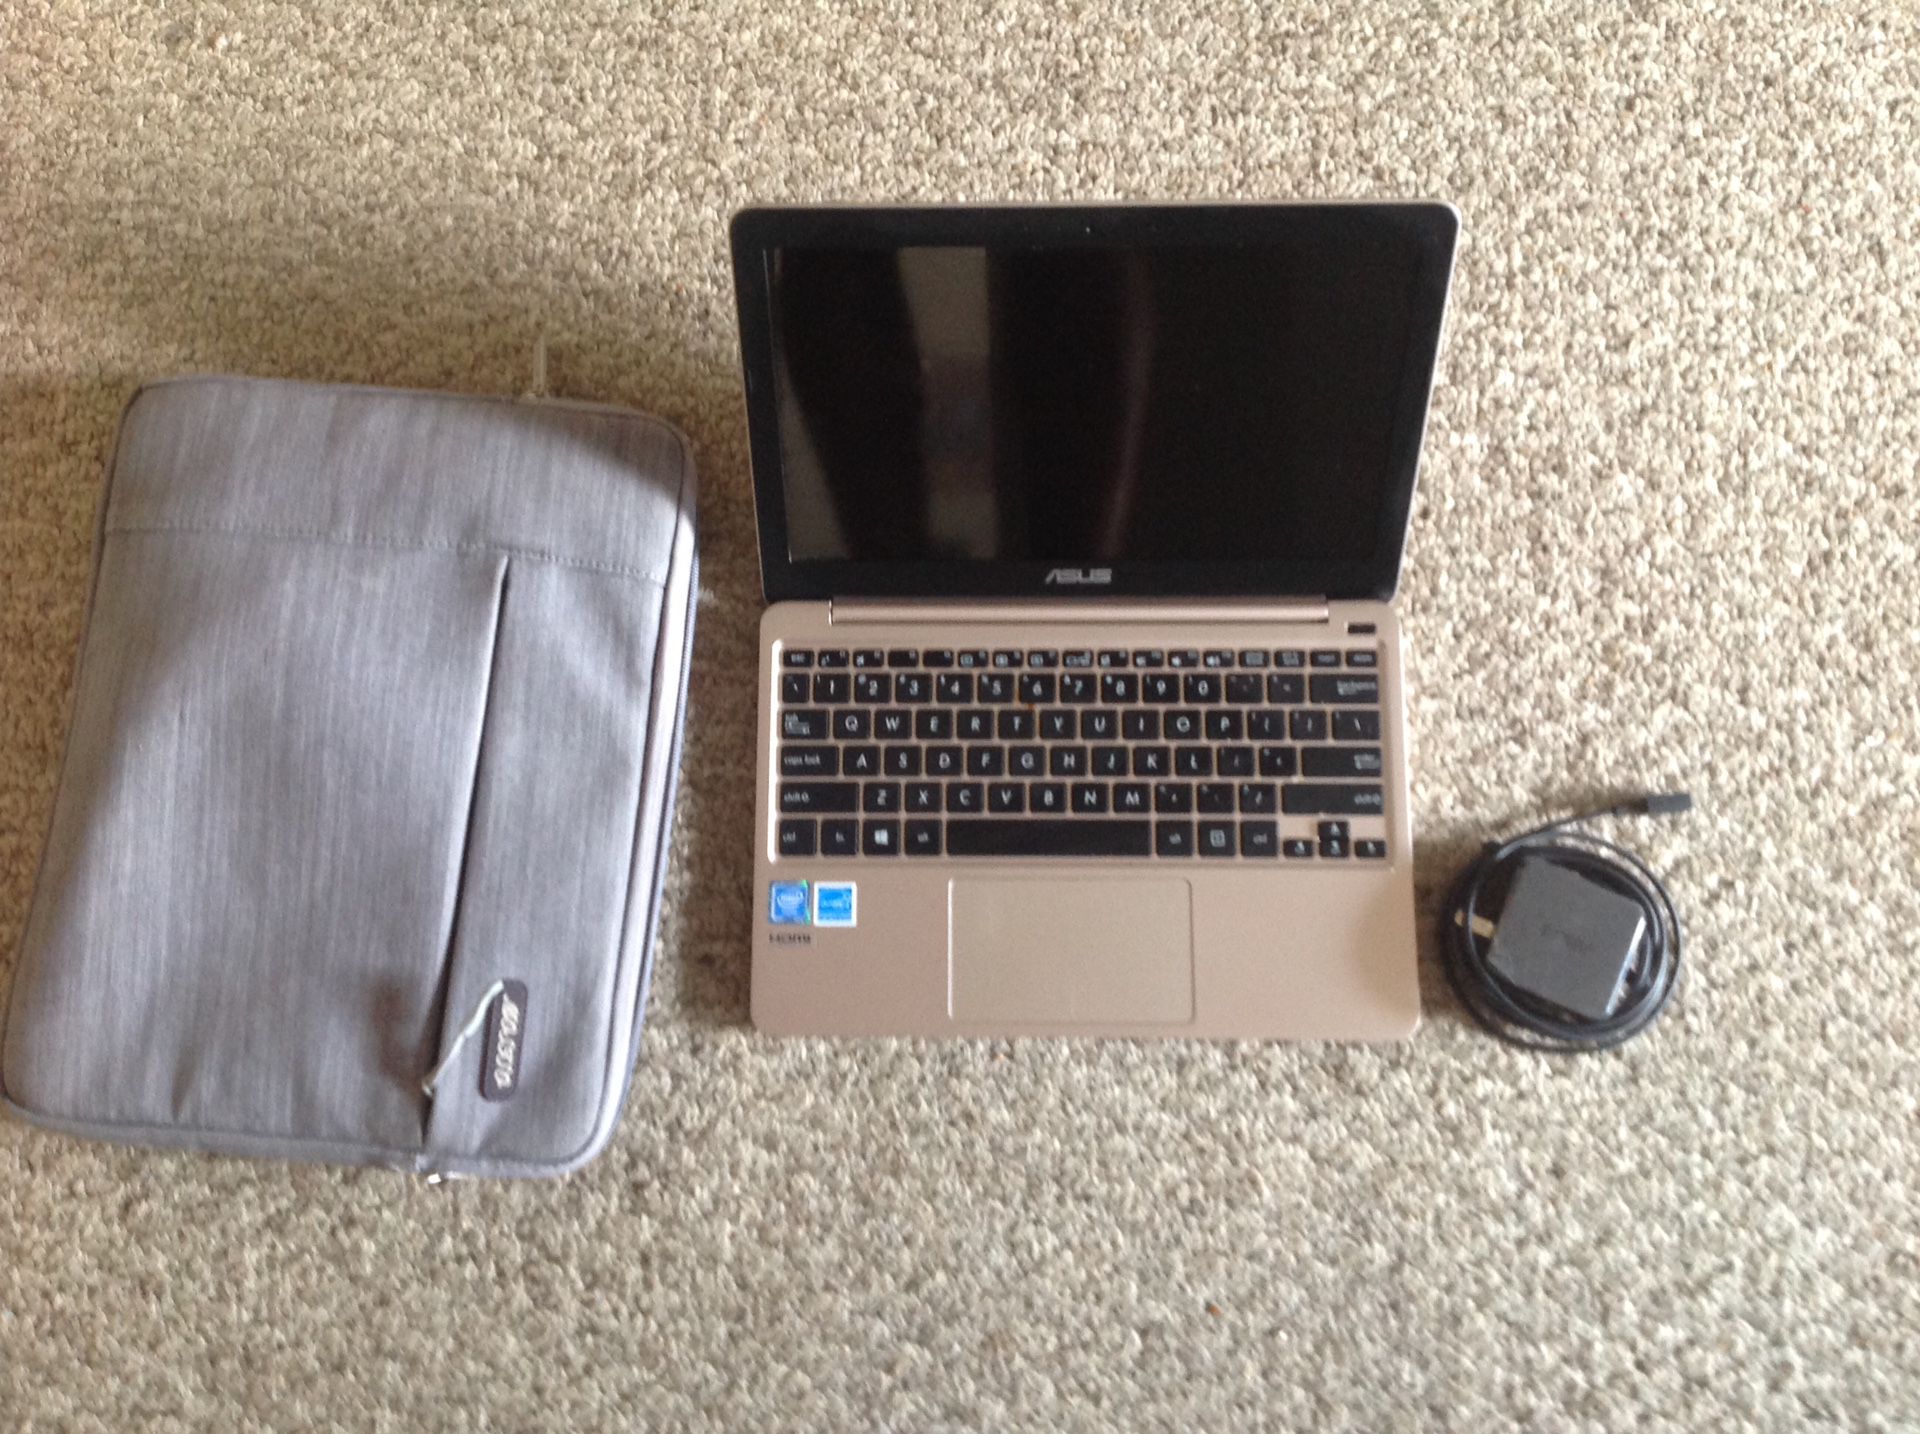 Asus notebook E200H mint condition with a case